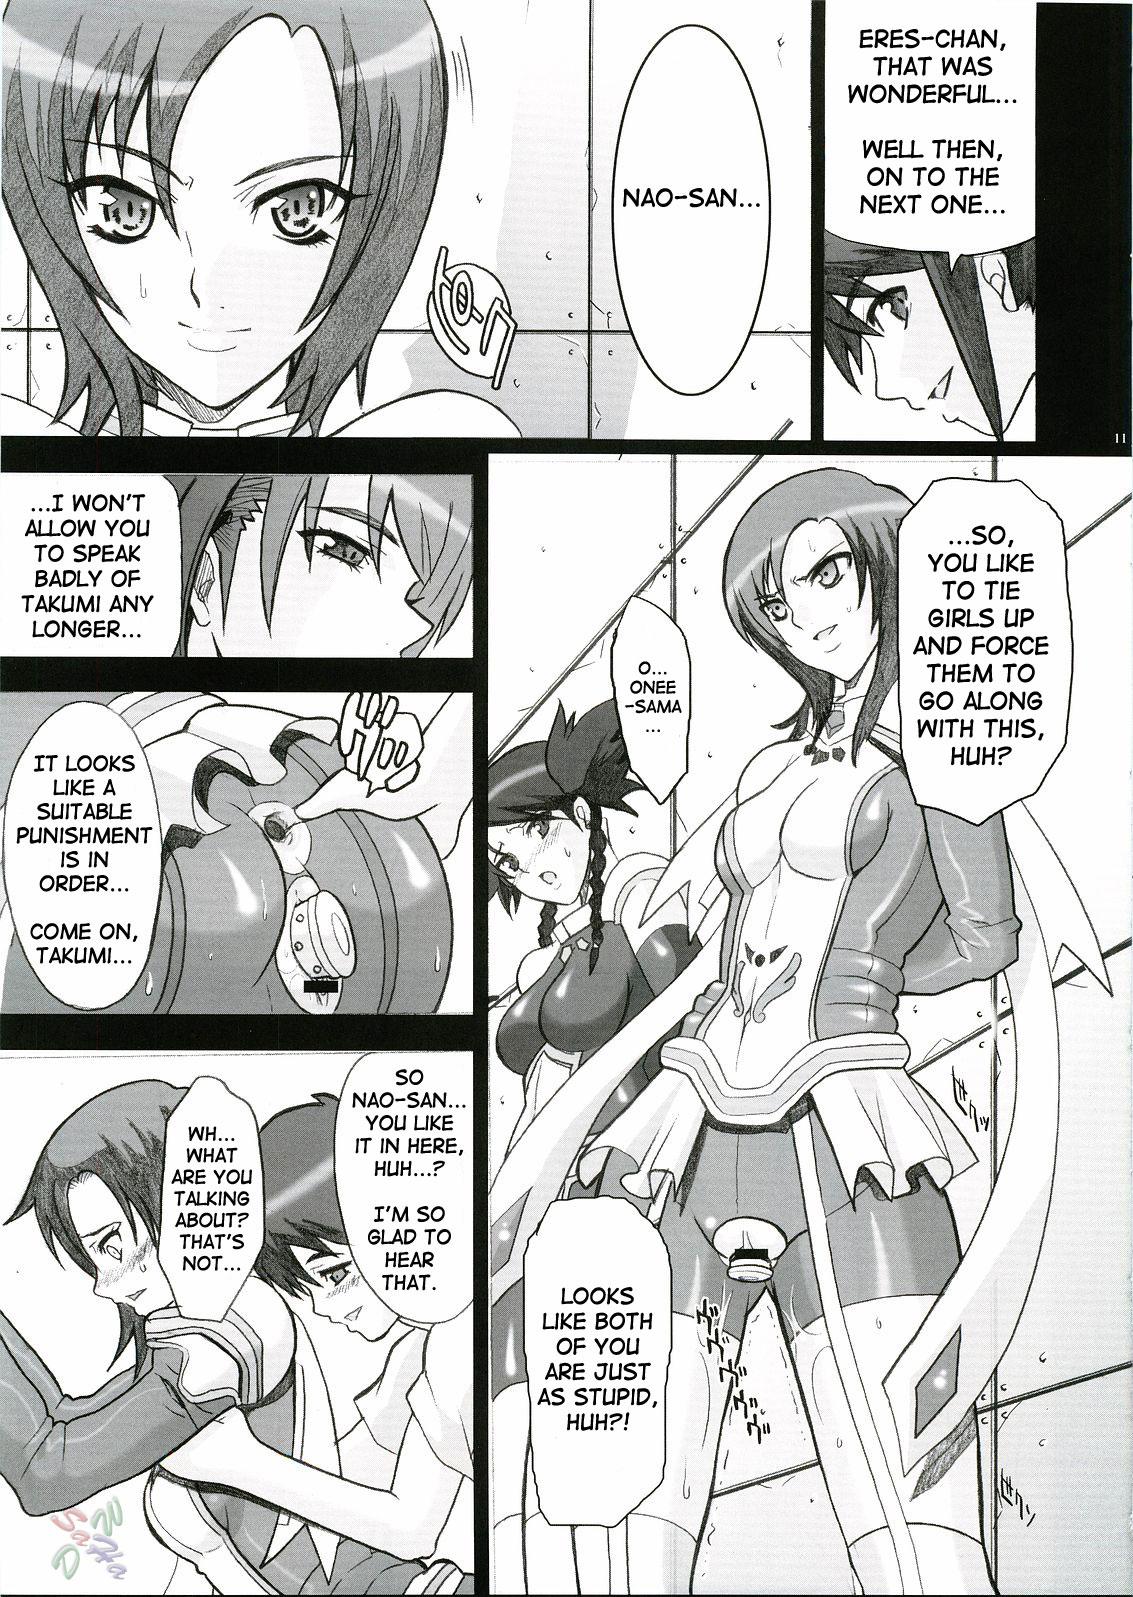 Mama IMPERIAL DAYS - Mai-otome Fist - Page 8